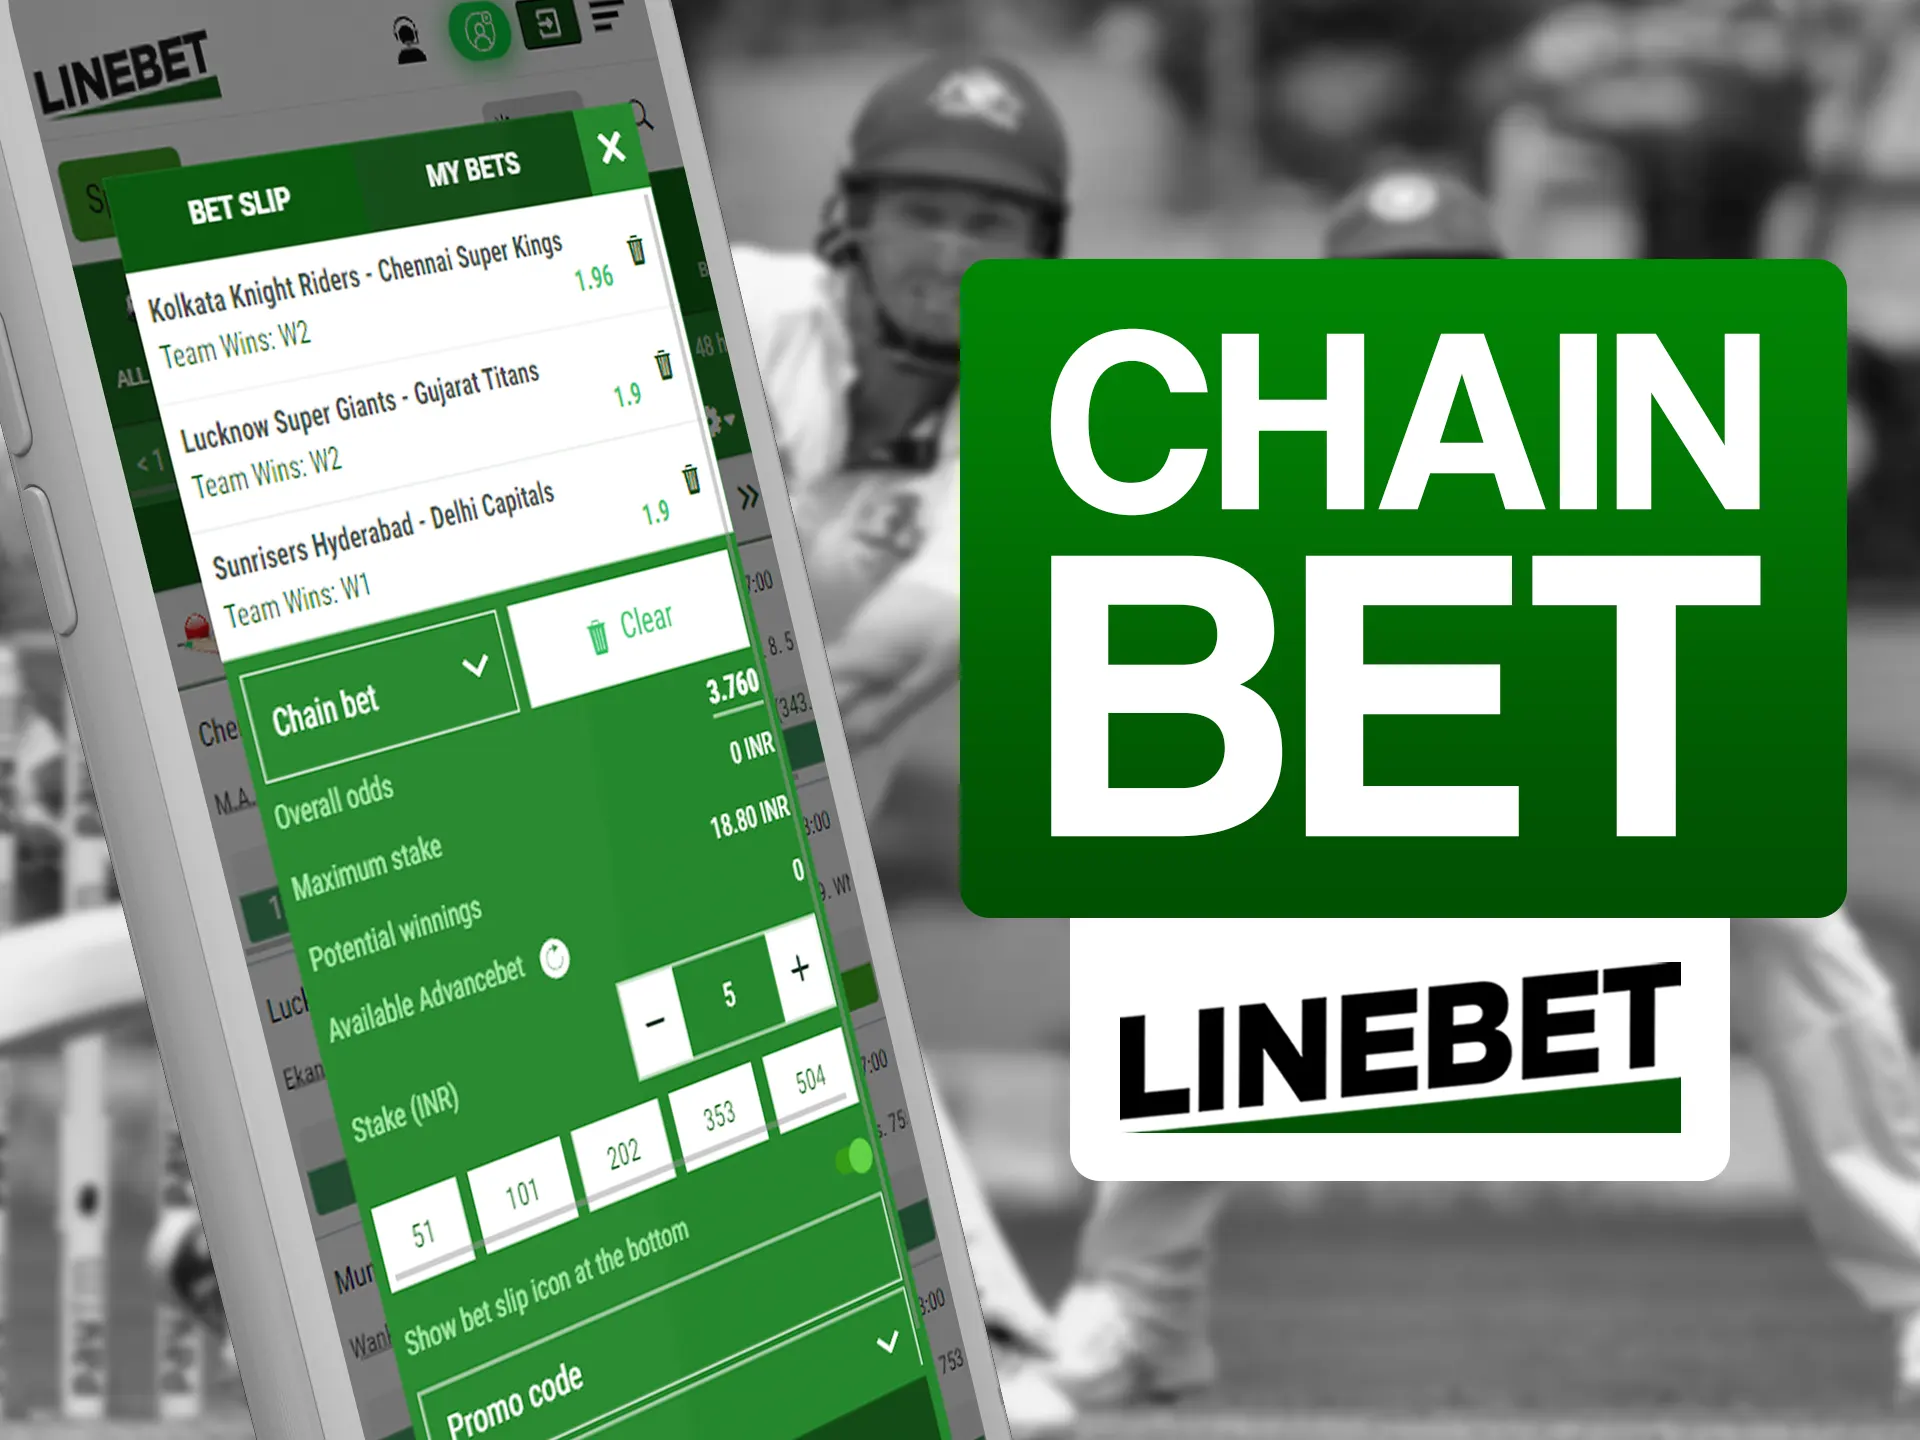 Make predictions on multiple of bets with Linebet chain bet.